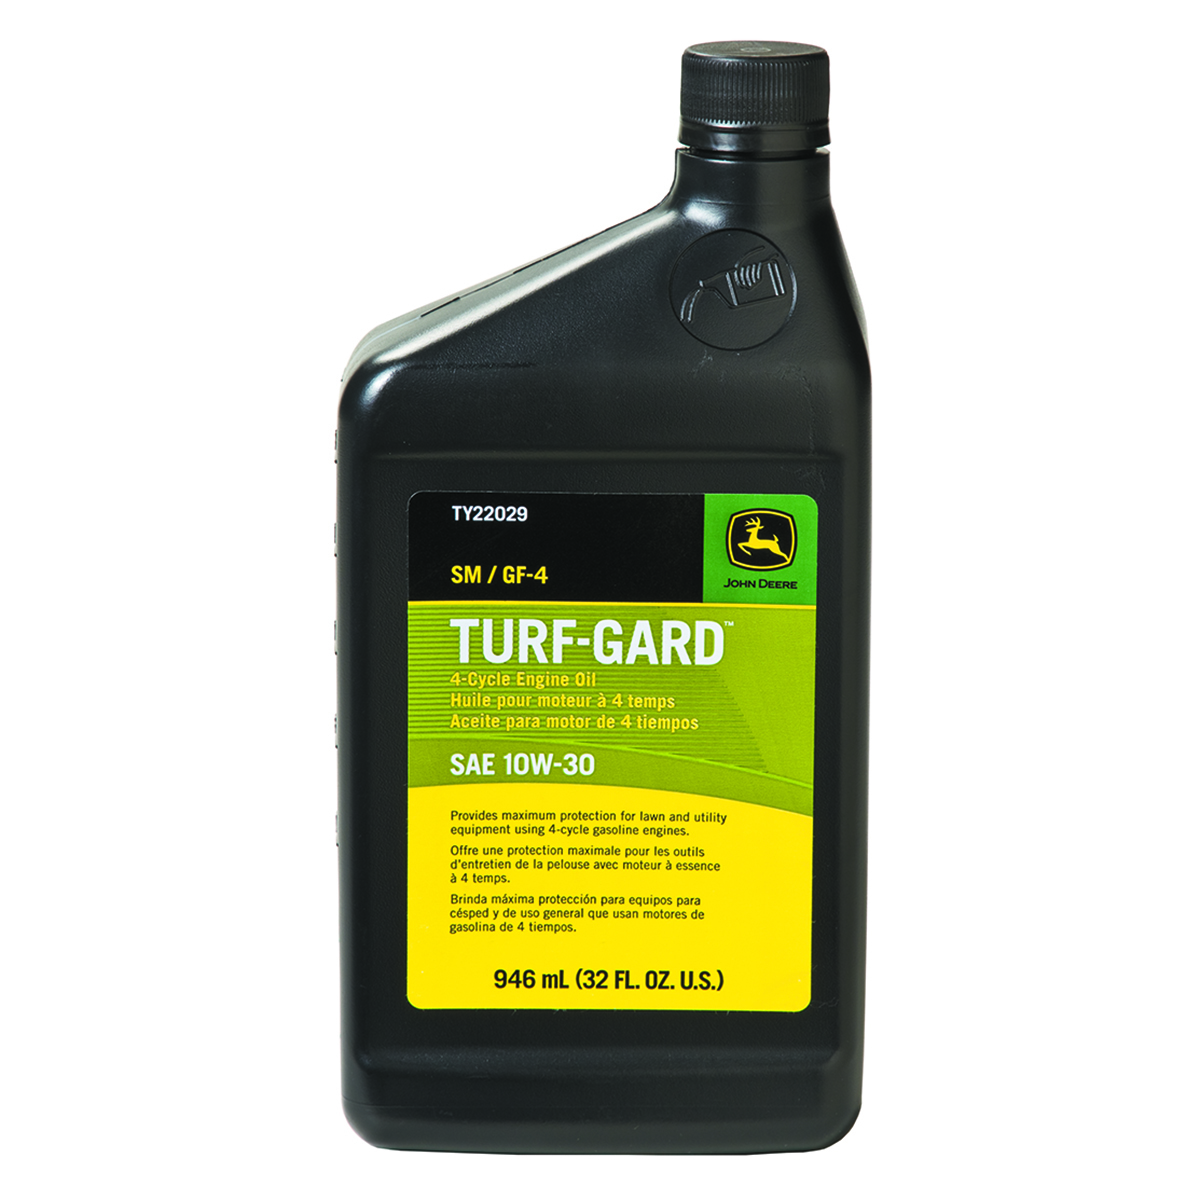 Engine Oil For All Riding And Walk Behind Mowers All Fluids Chemicals Fluids Chemicals Genuine Parts John Deere Products Johndeerestore